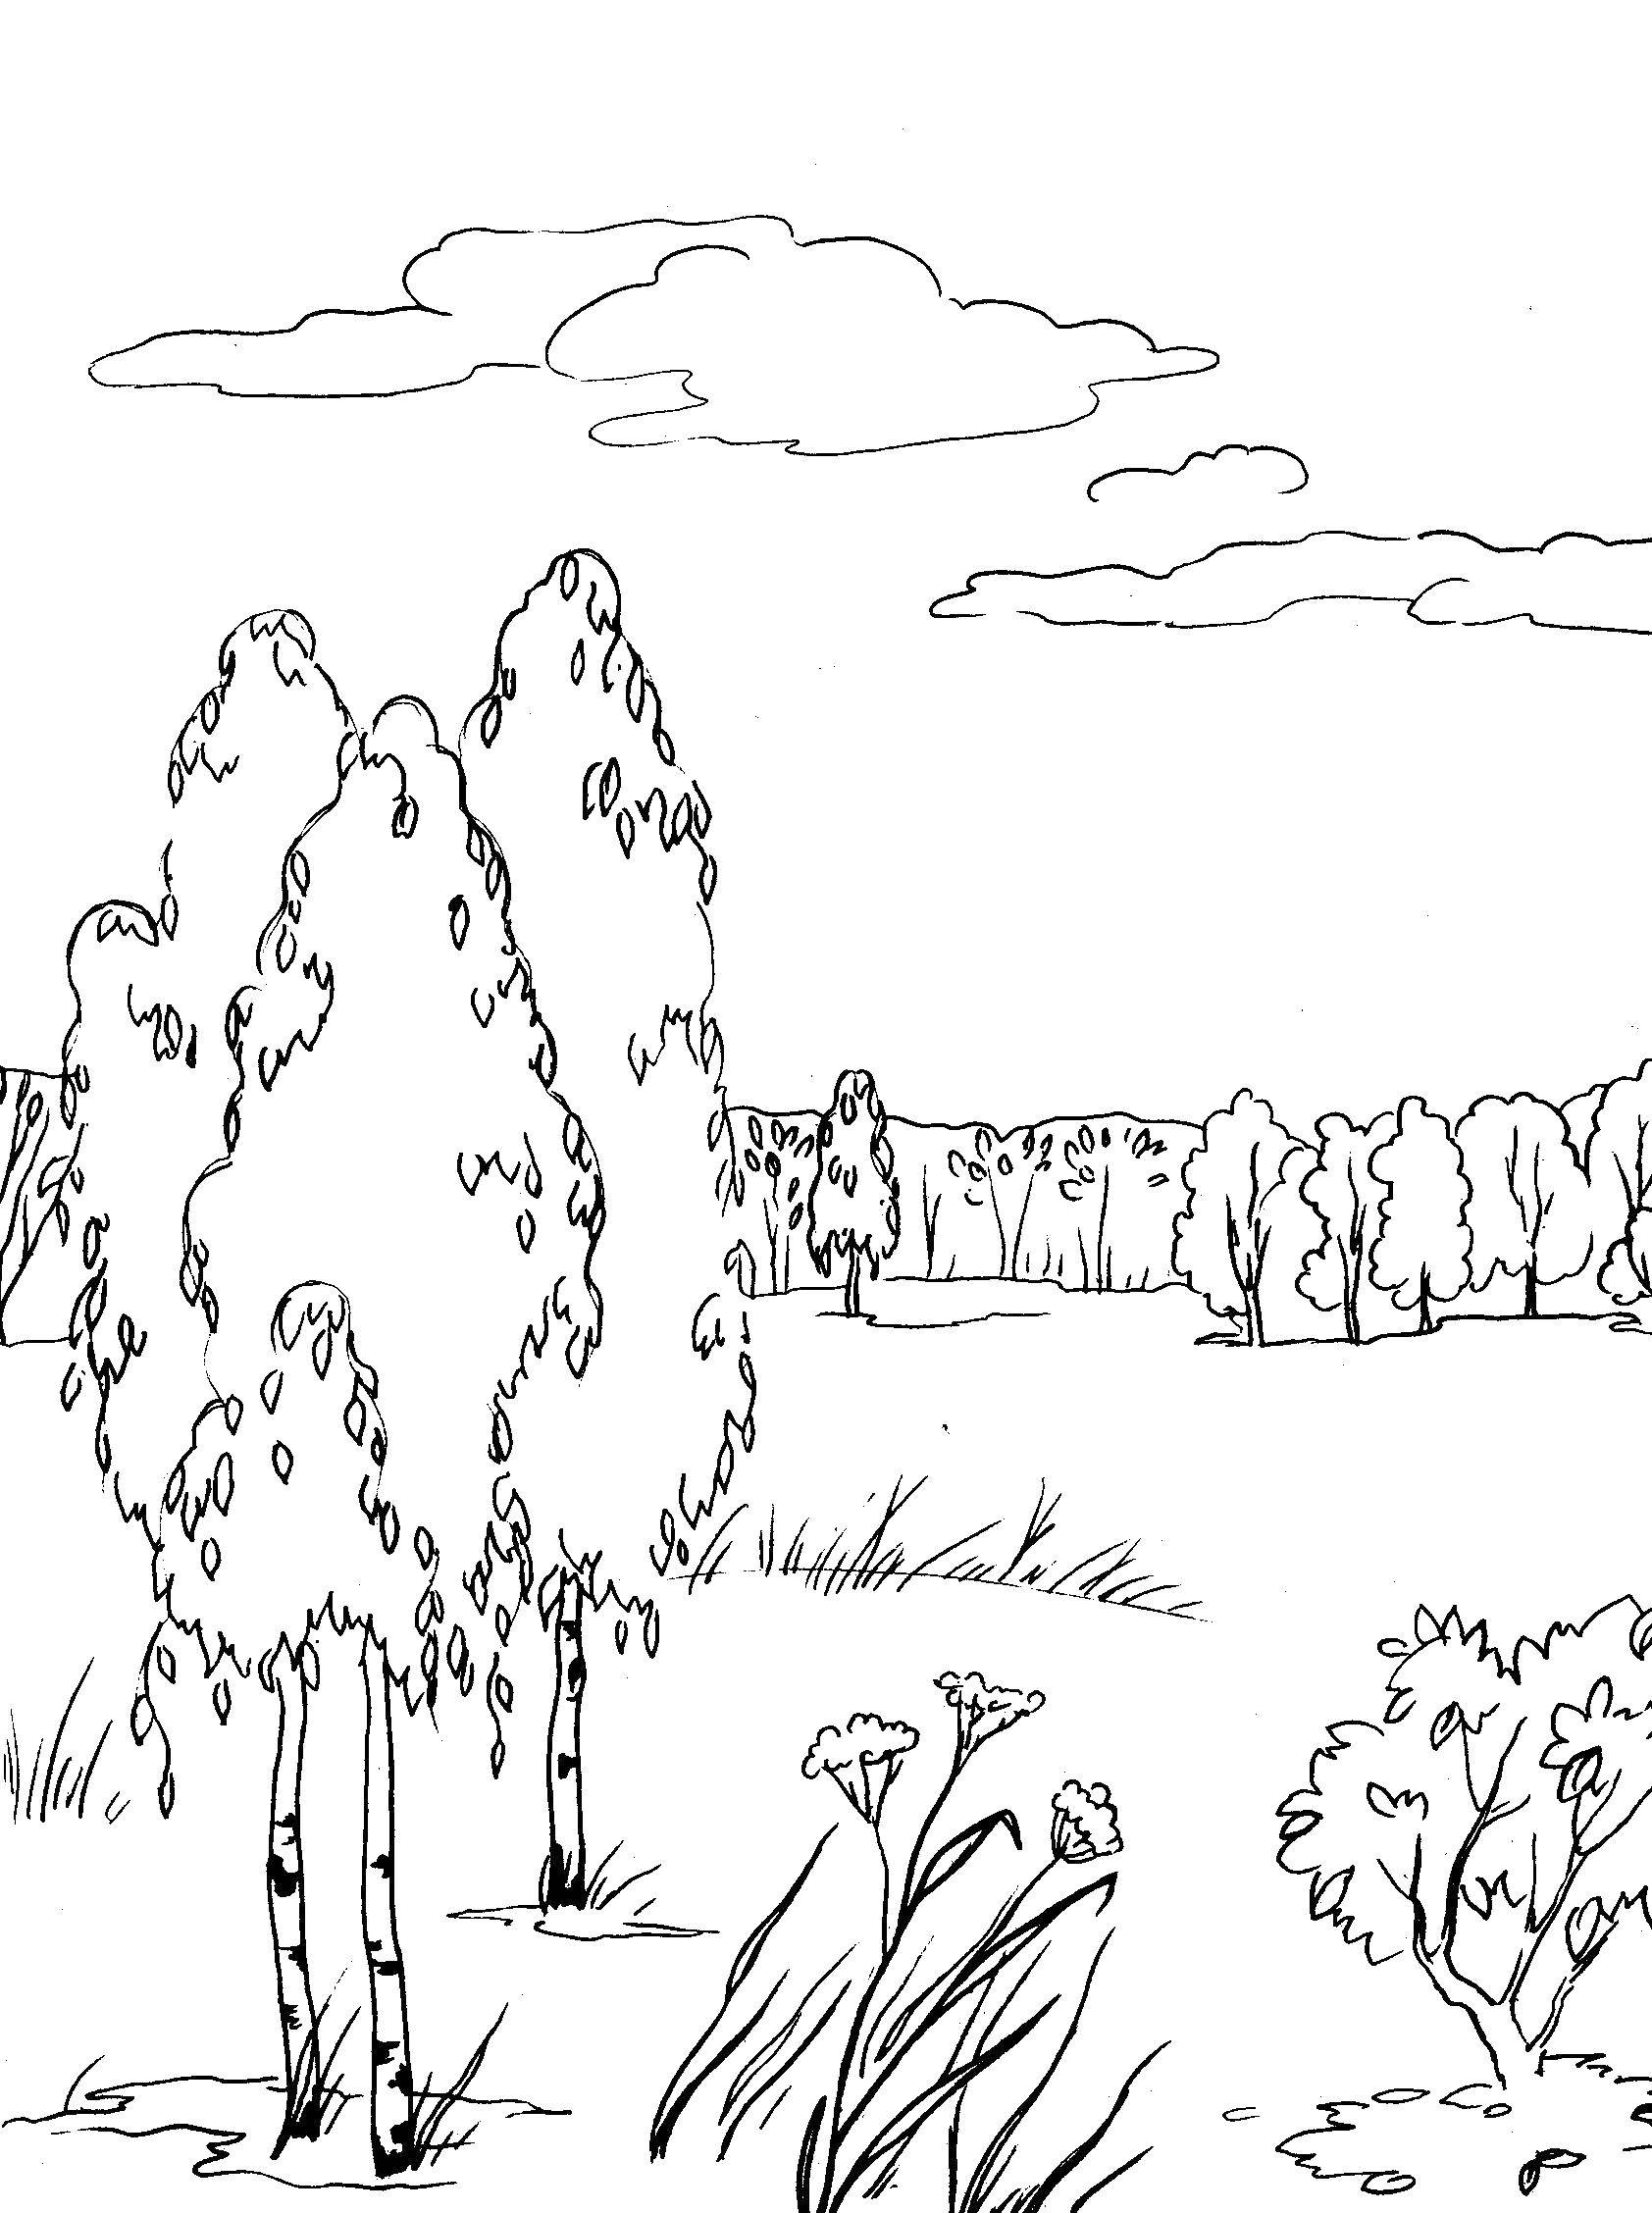 Coloring Birch forest. Category Nature. Tags:  the forest.